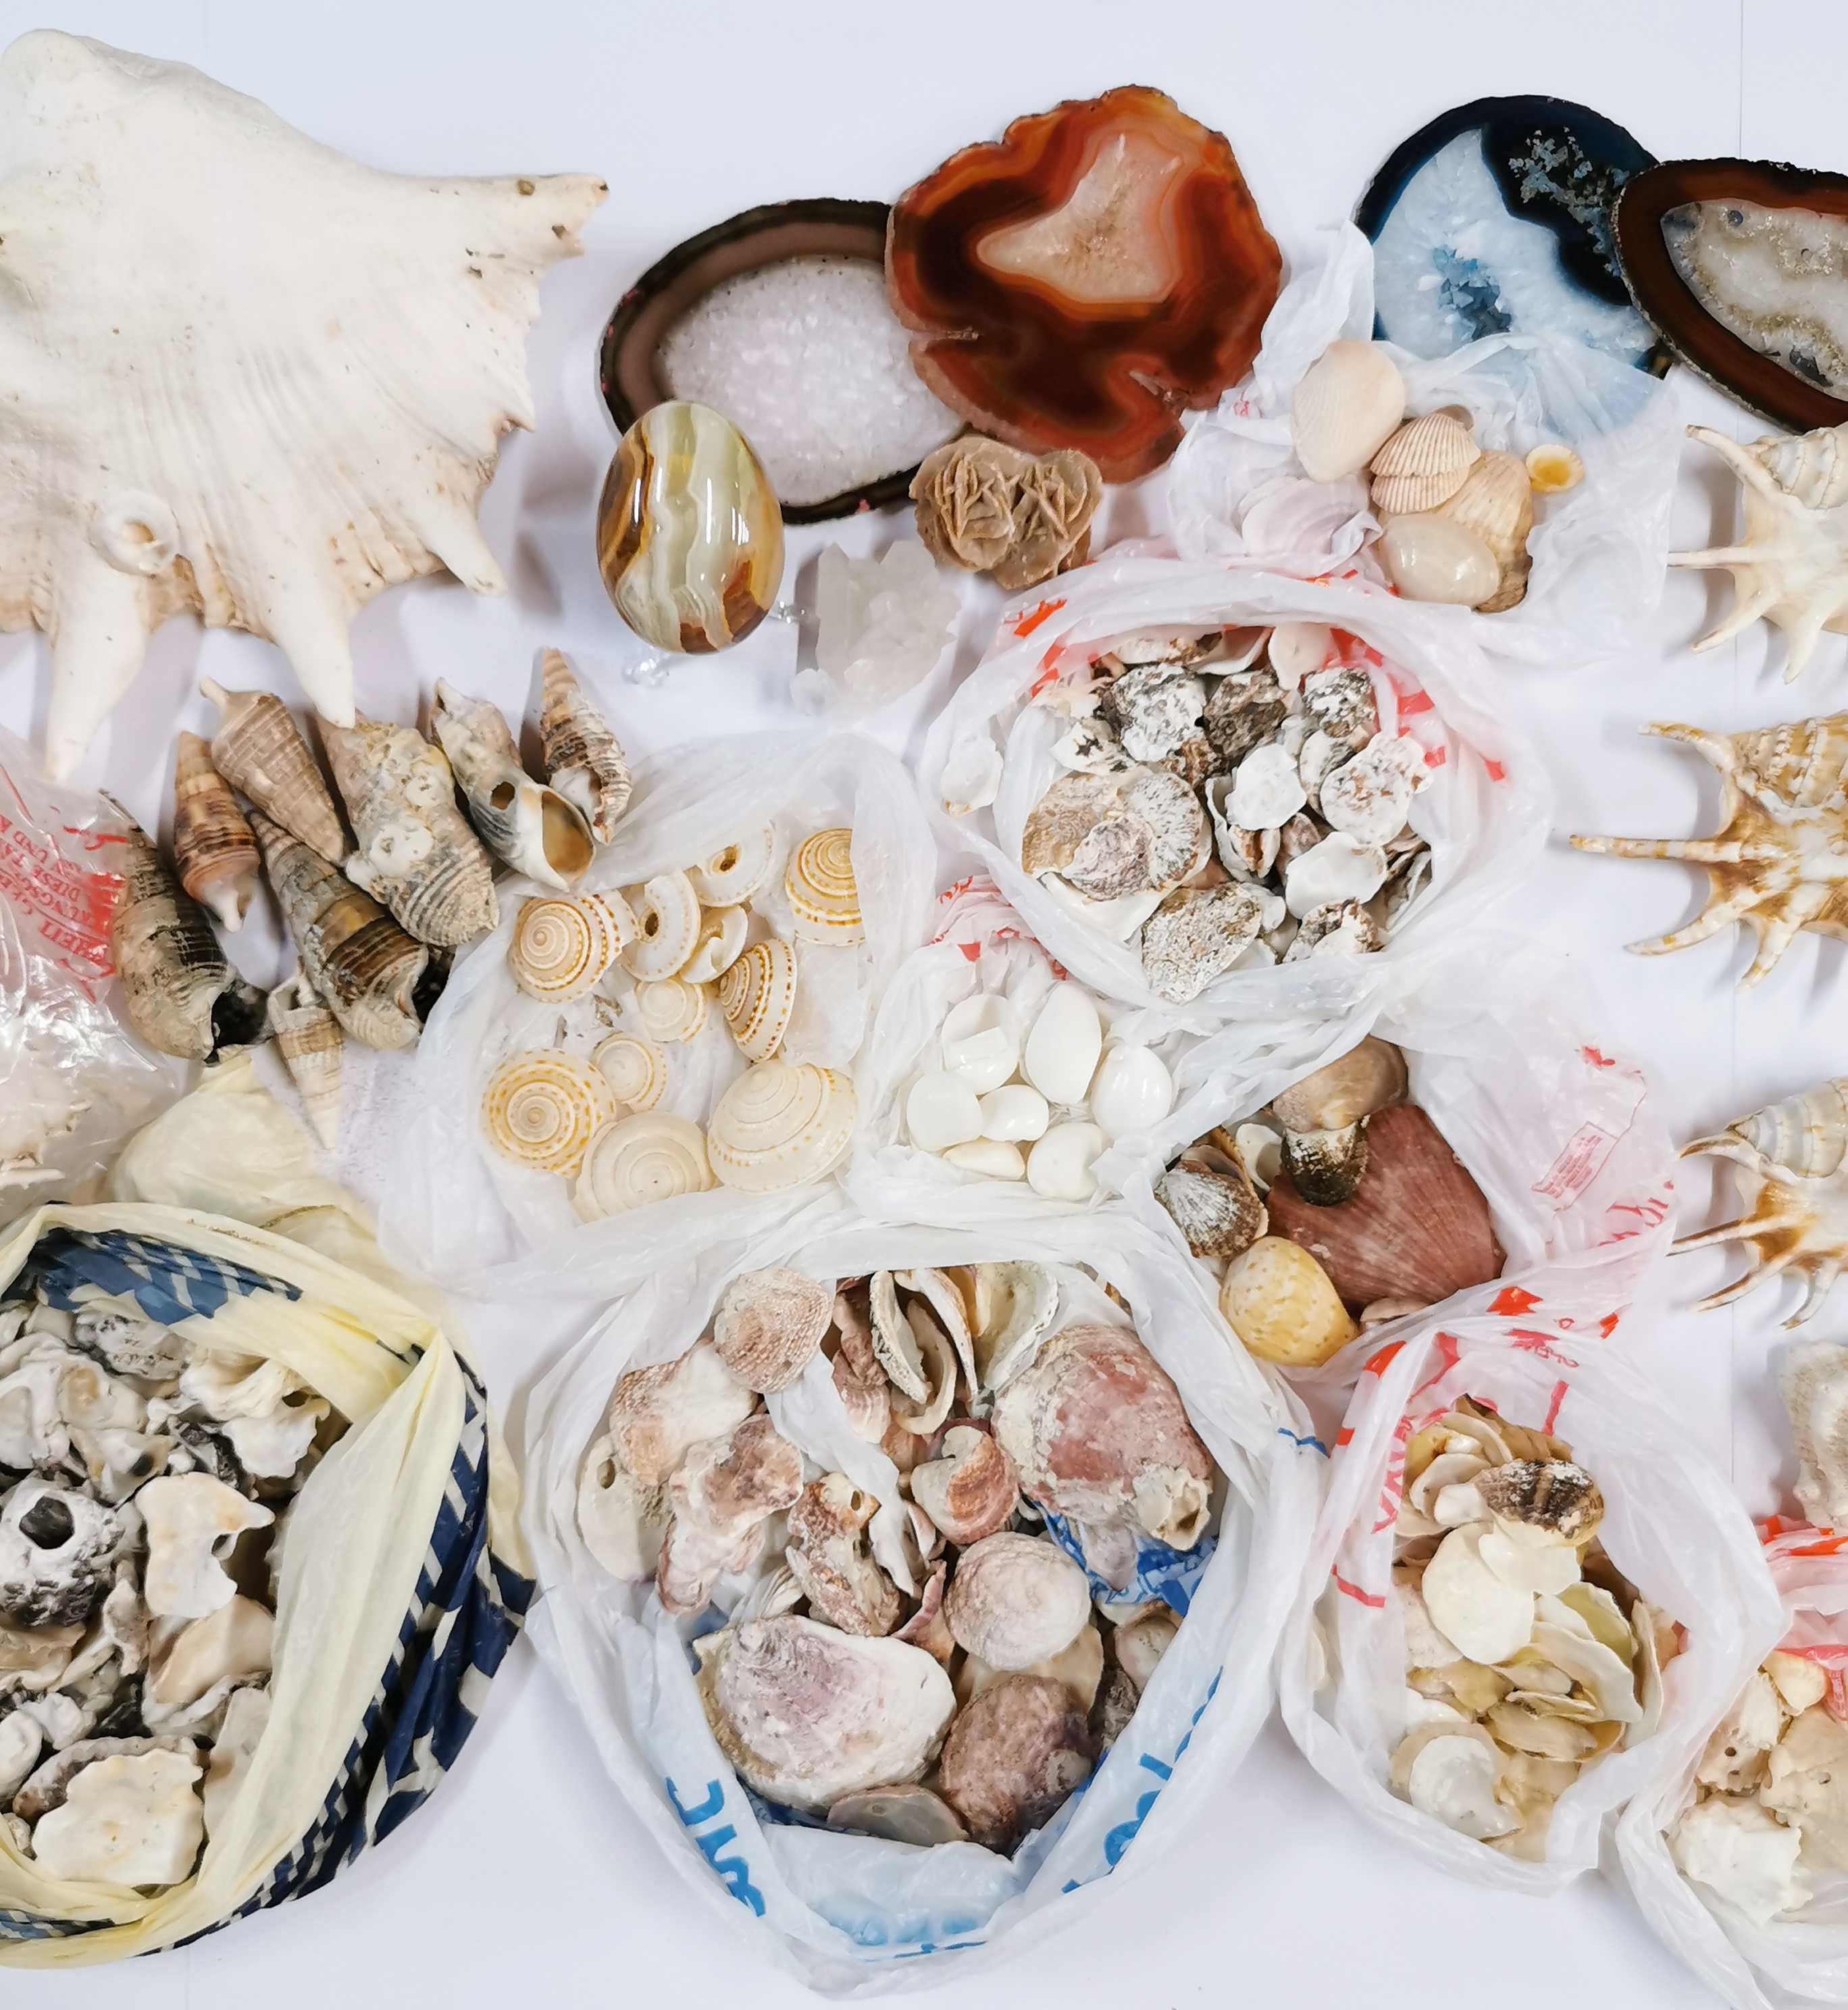 An extensive collection of sea shells and minerals. - Image 3 of 4